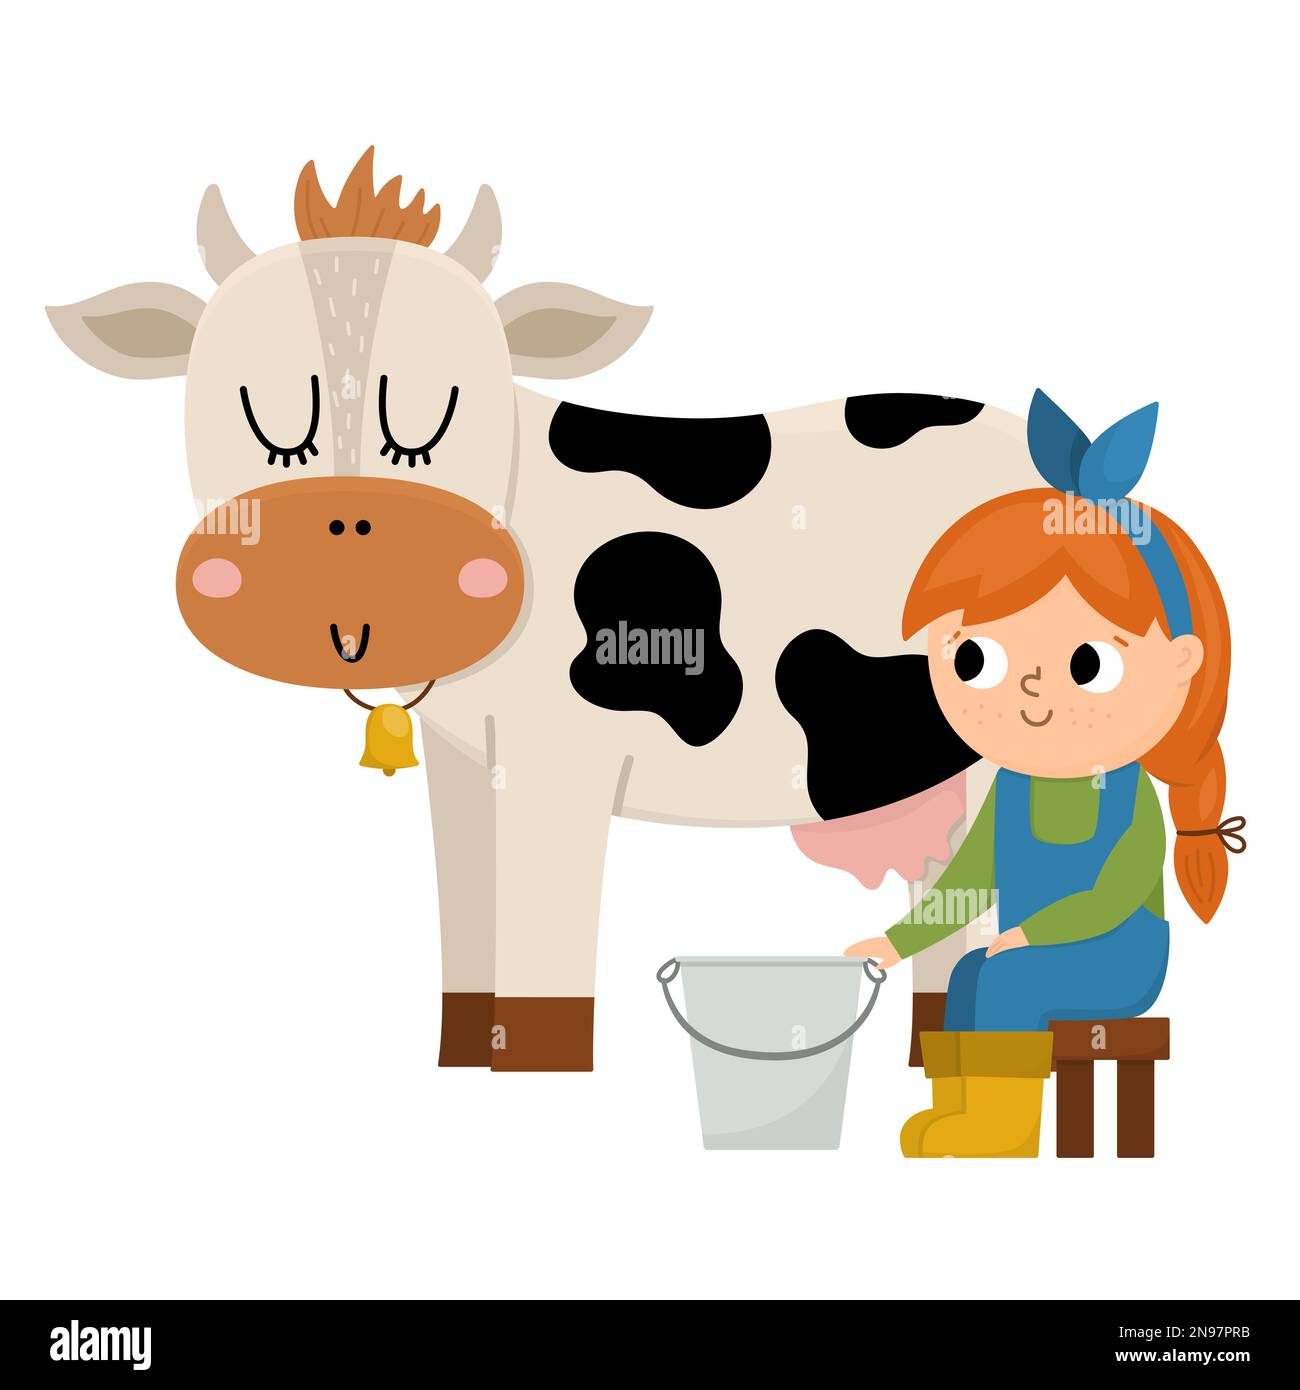 Vector milkmaid icon. Farmer girl milking cow. Cute kid doing agricultural work. Rural country scene. Child with cute animal. Funny farm illustration Stock Vector